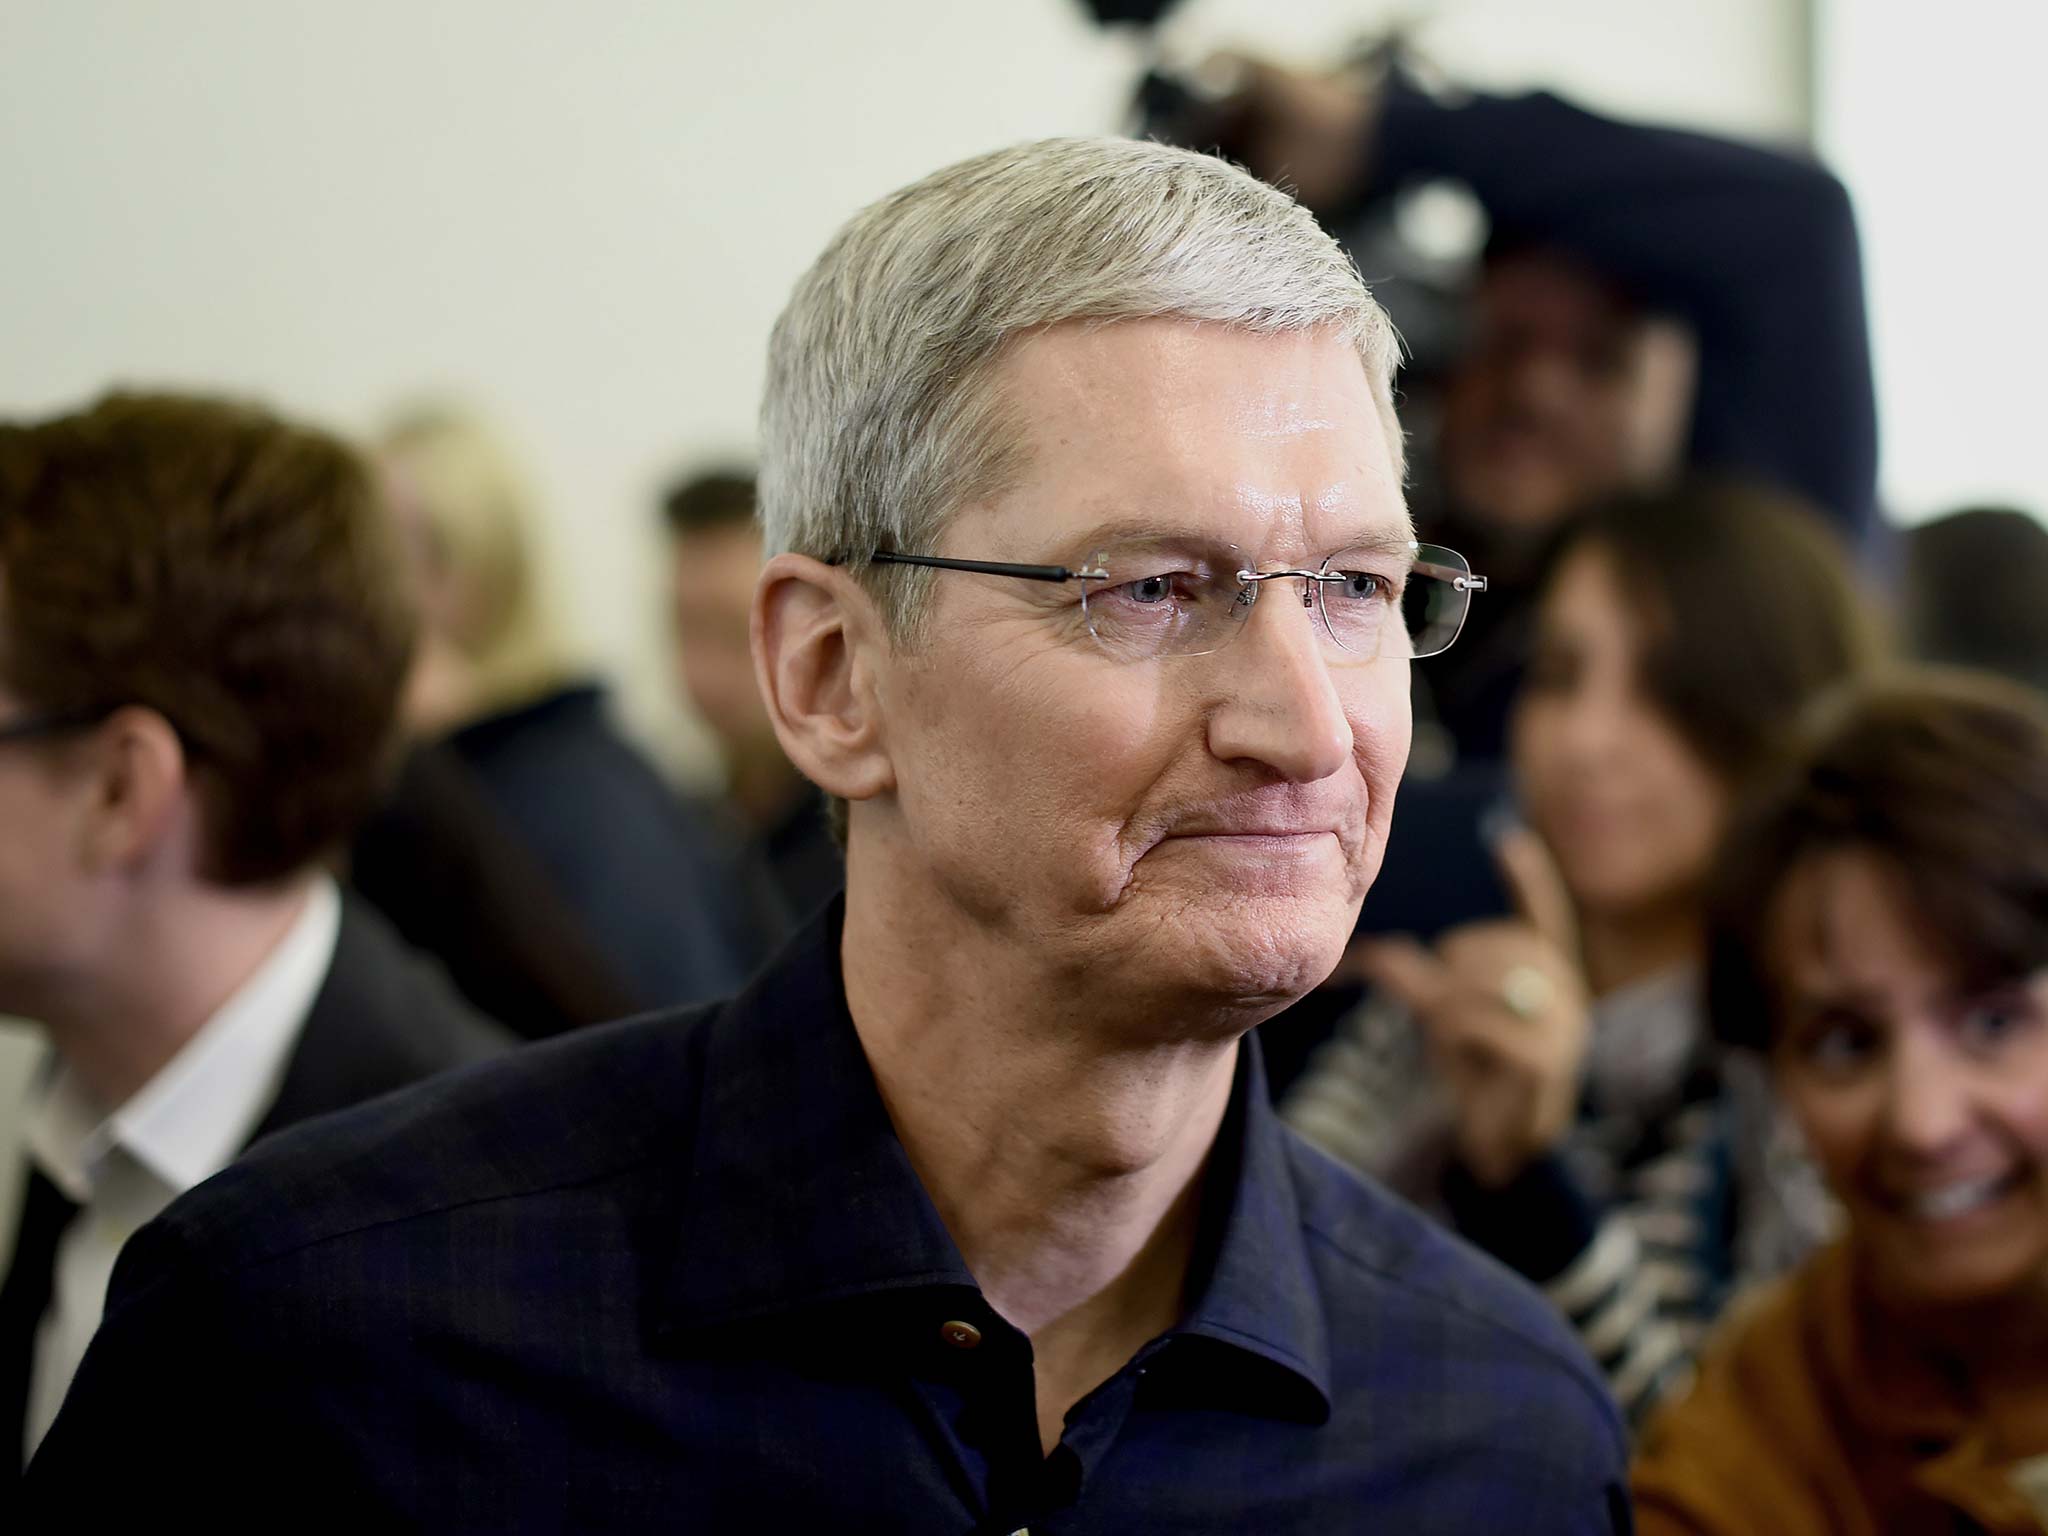 Tim Cook, CEO of Apple Inc., after a product announcement in Cupertino, California, on Oct. 16, 2014.
